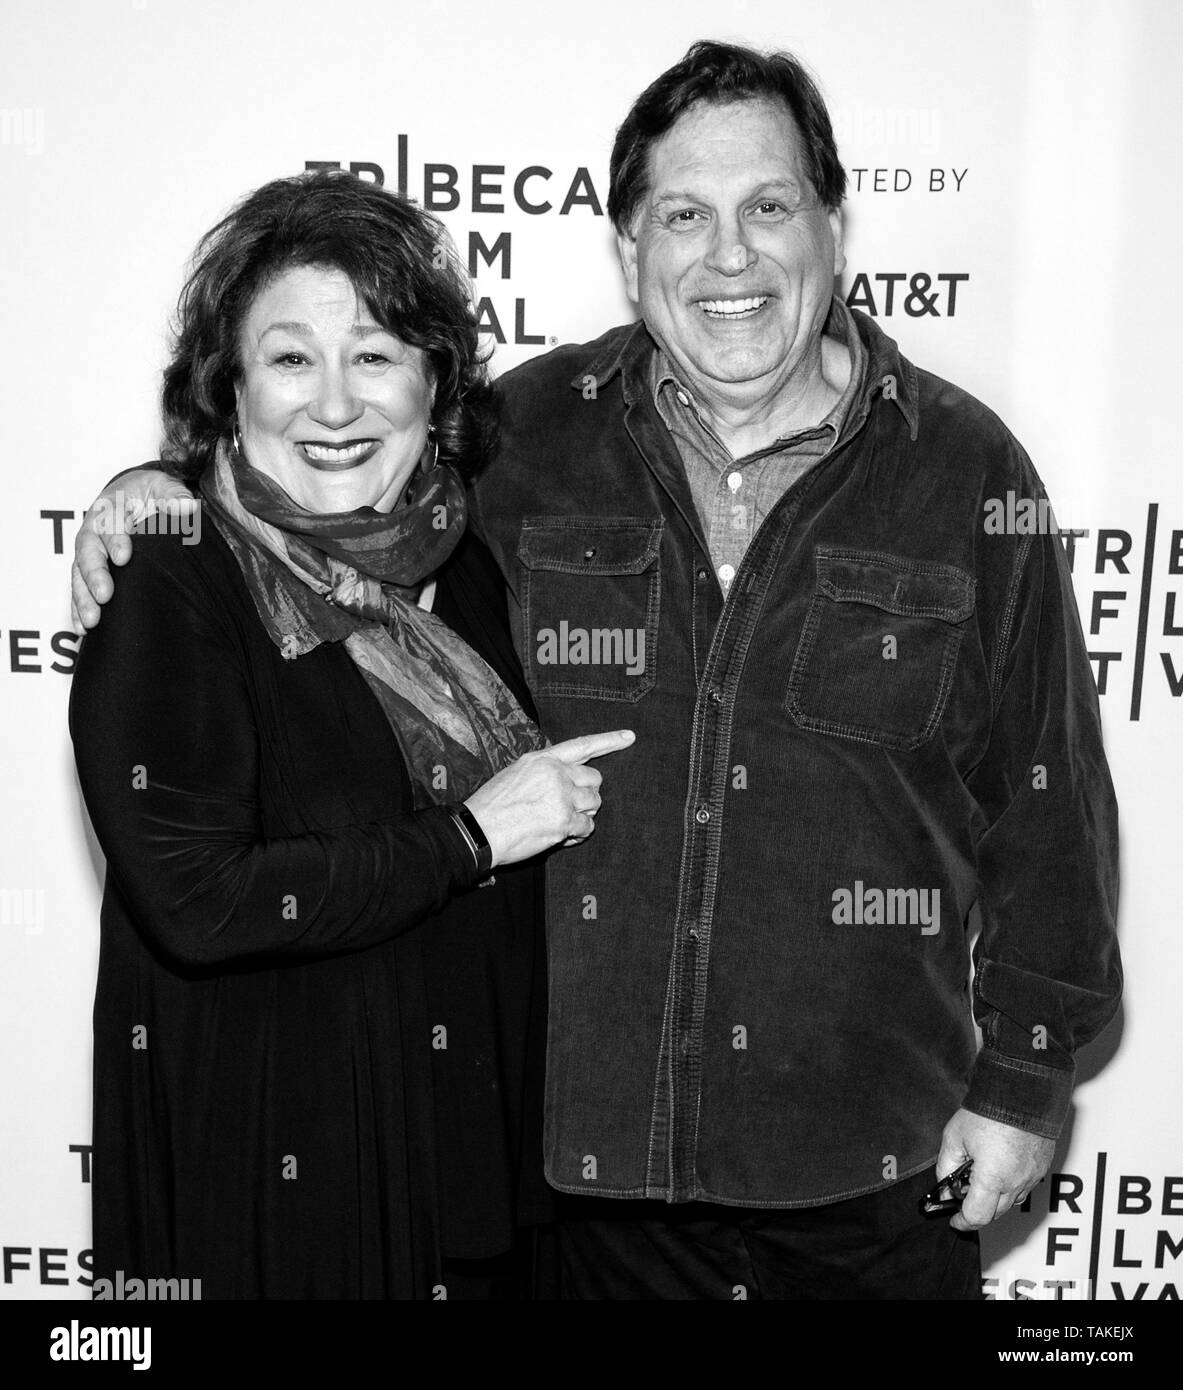 New York, NY - April 26, 2019: Margo Martindale and Skipp Sudduth attend the 'Blow The Man Down' screening during the 2019 Tribeca Film Festival at SV Stock Photo